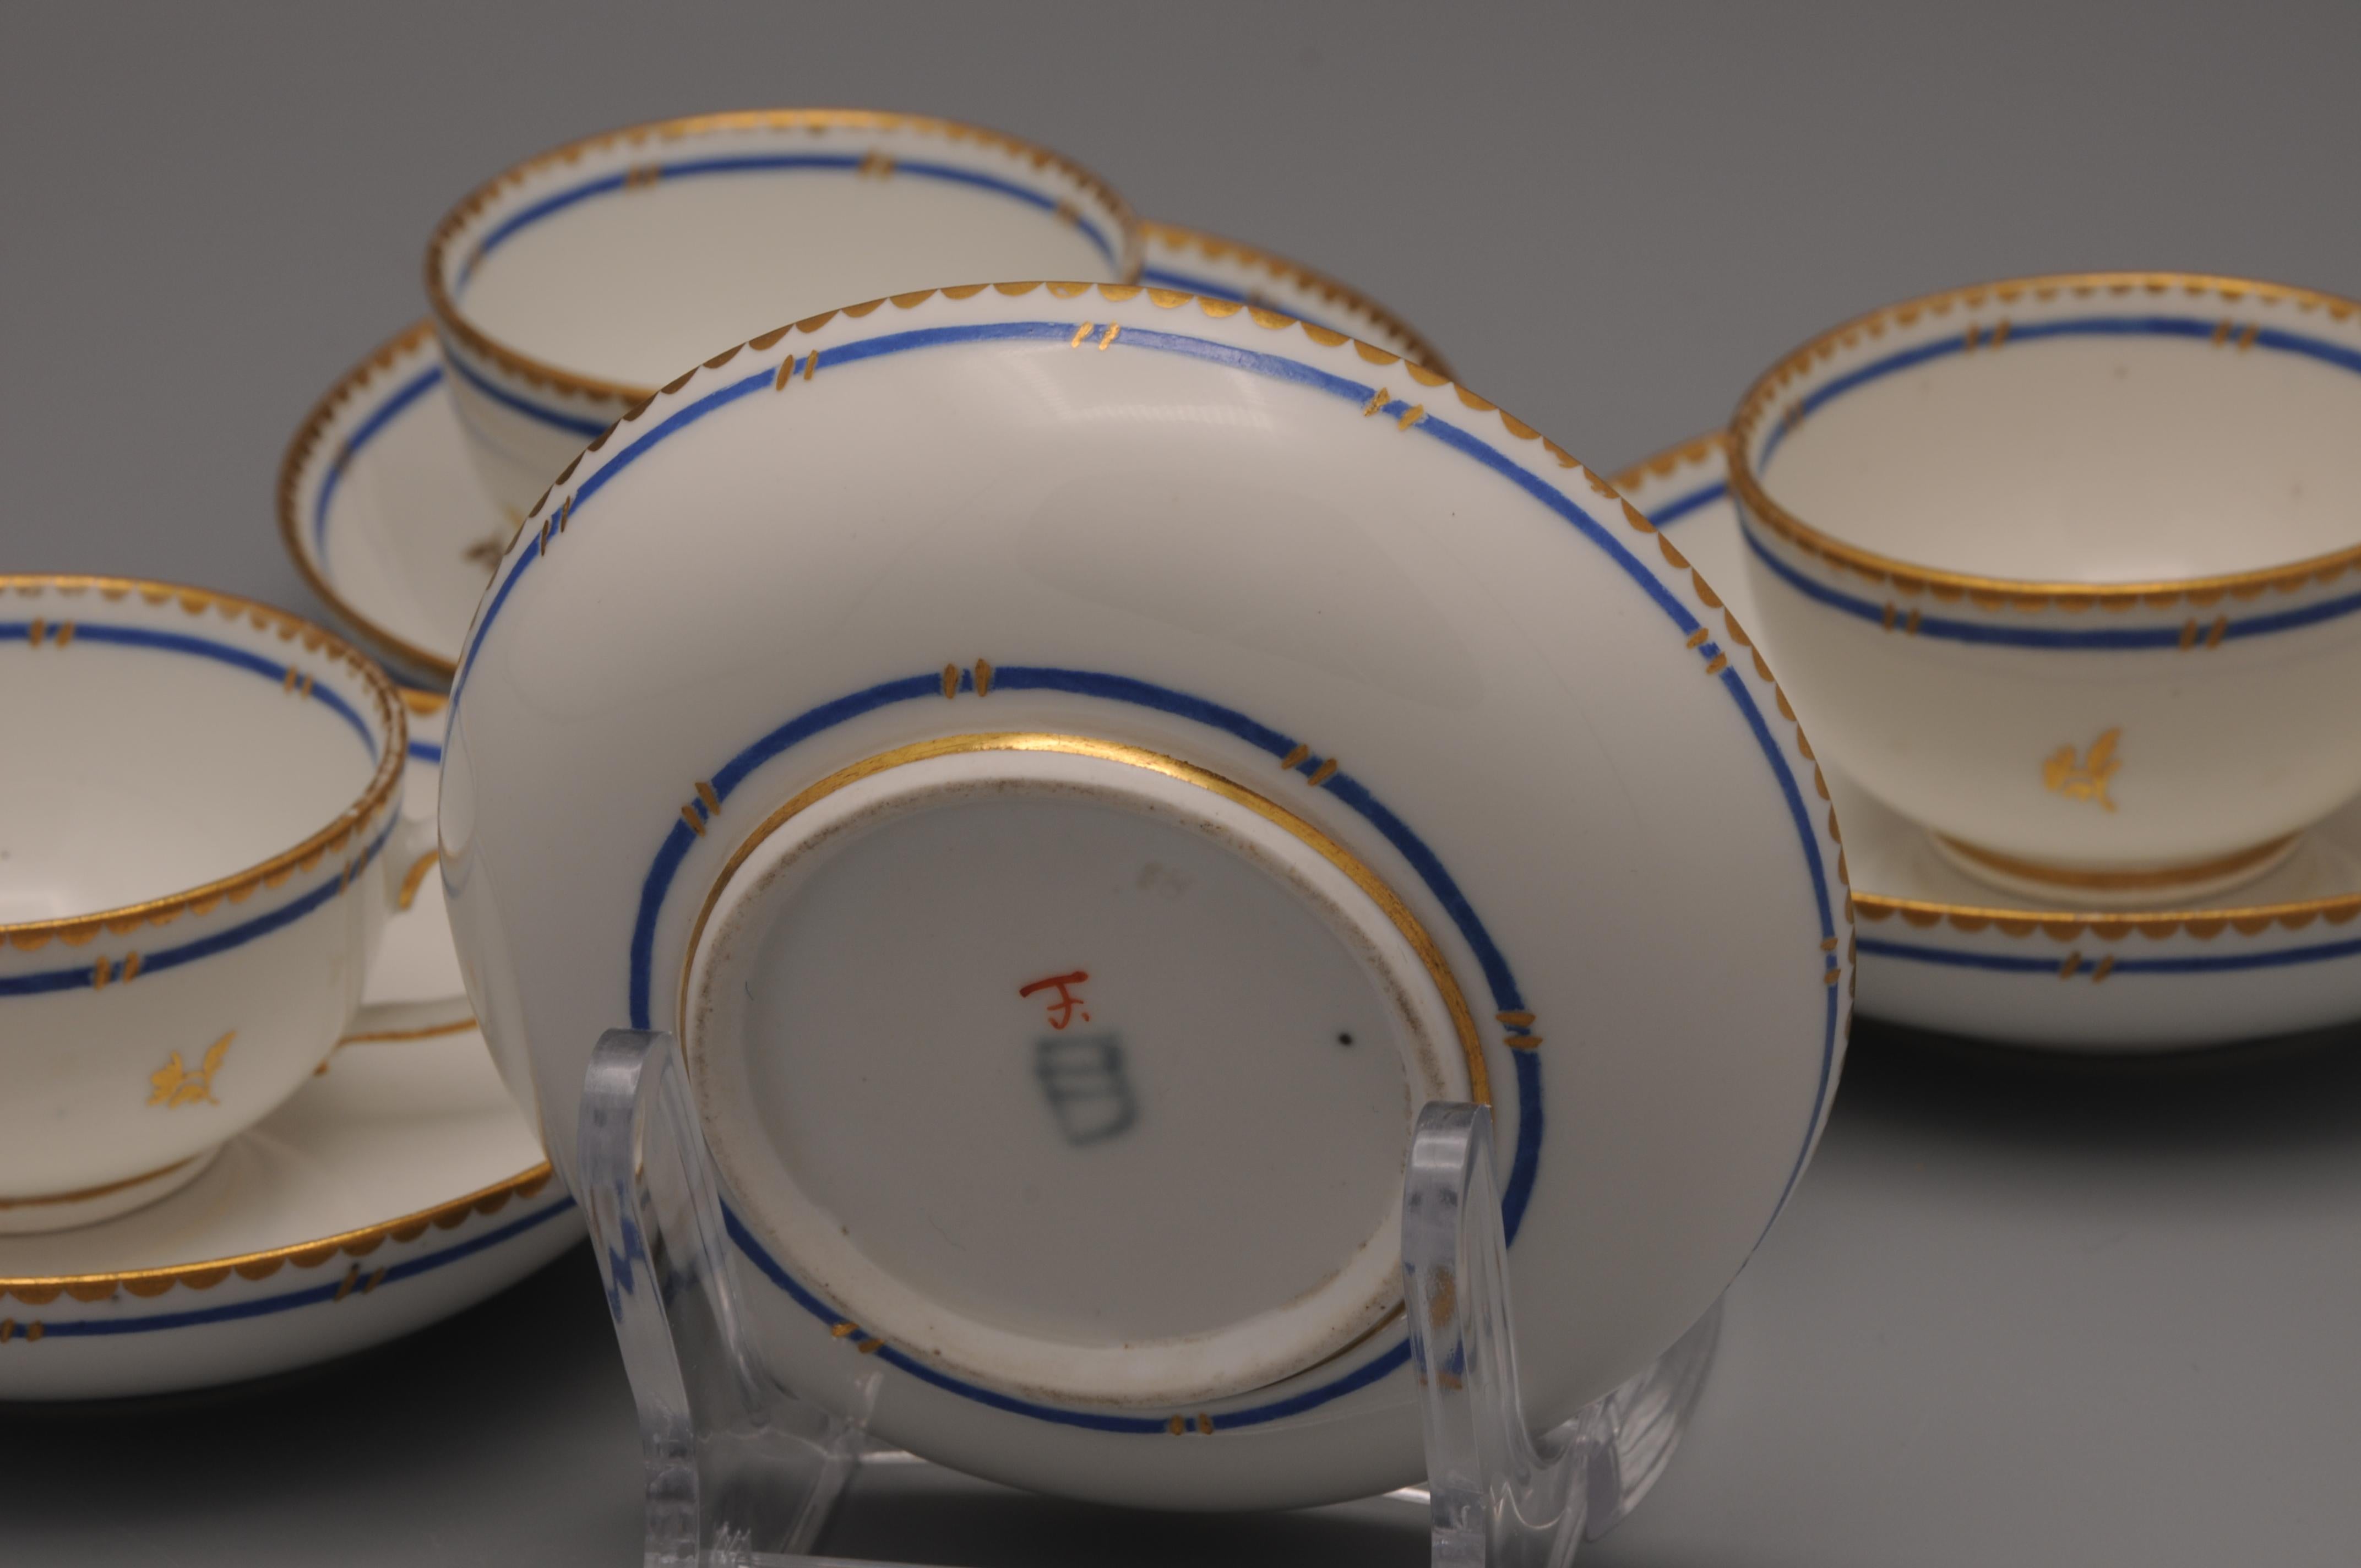 18th Century Vienna porcelain - 4 cups and saucers, 1781 For Sale